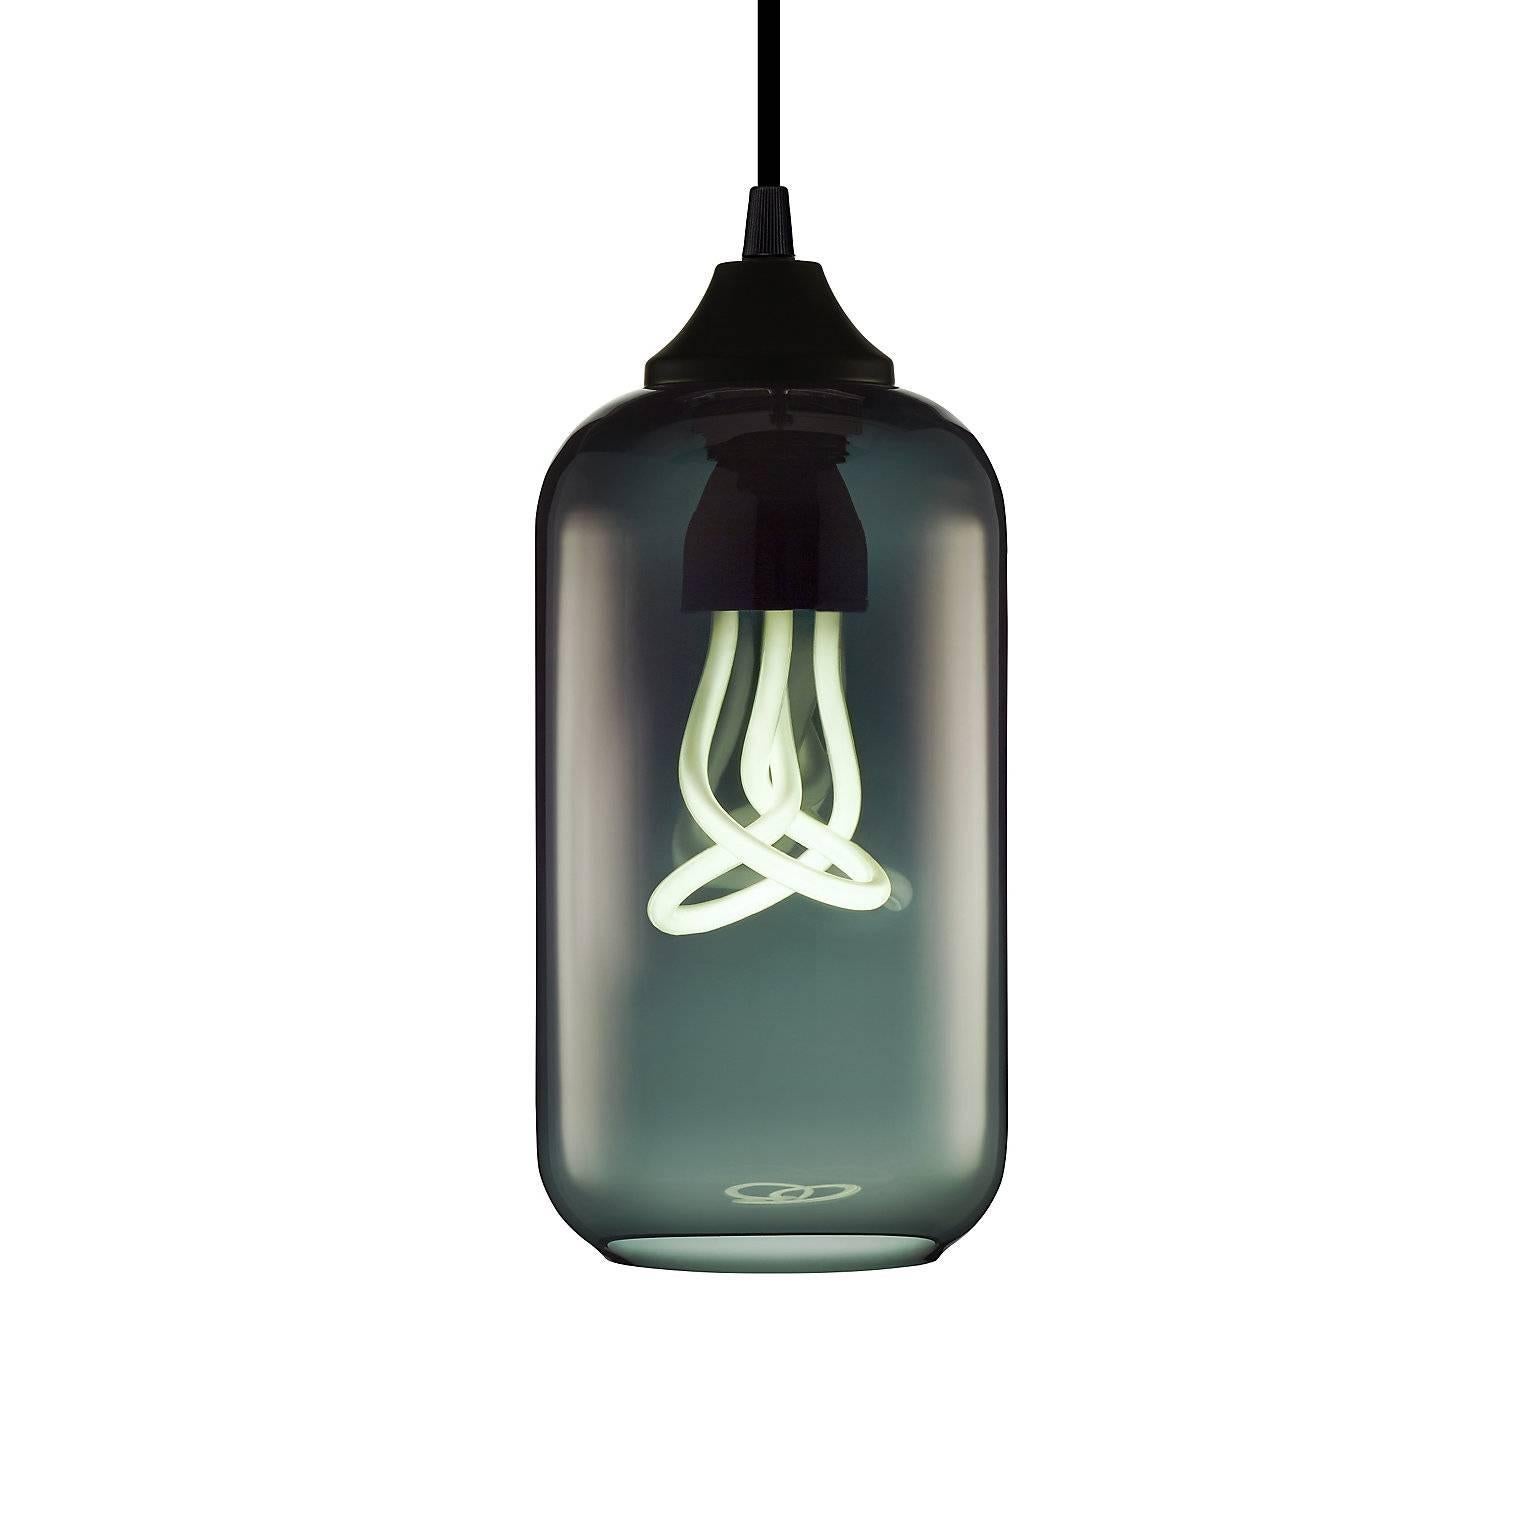 With a vivid array of options in both transparent and opaque glass colors, the compact yet versatile Helio Series charms and delights. The Helio pendant is sleek enough to stand on its own and simple enough to shine in tightly grouped bouquets from